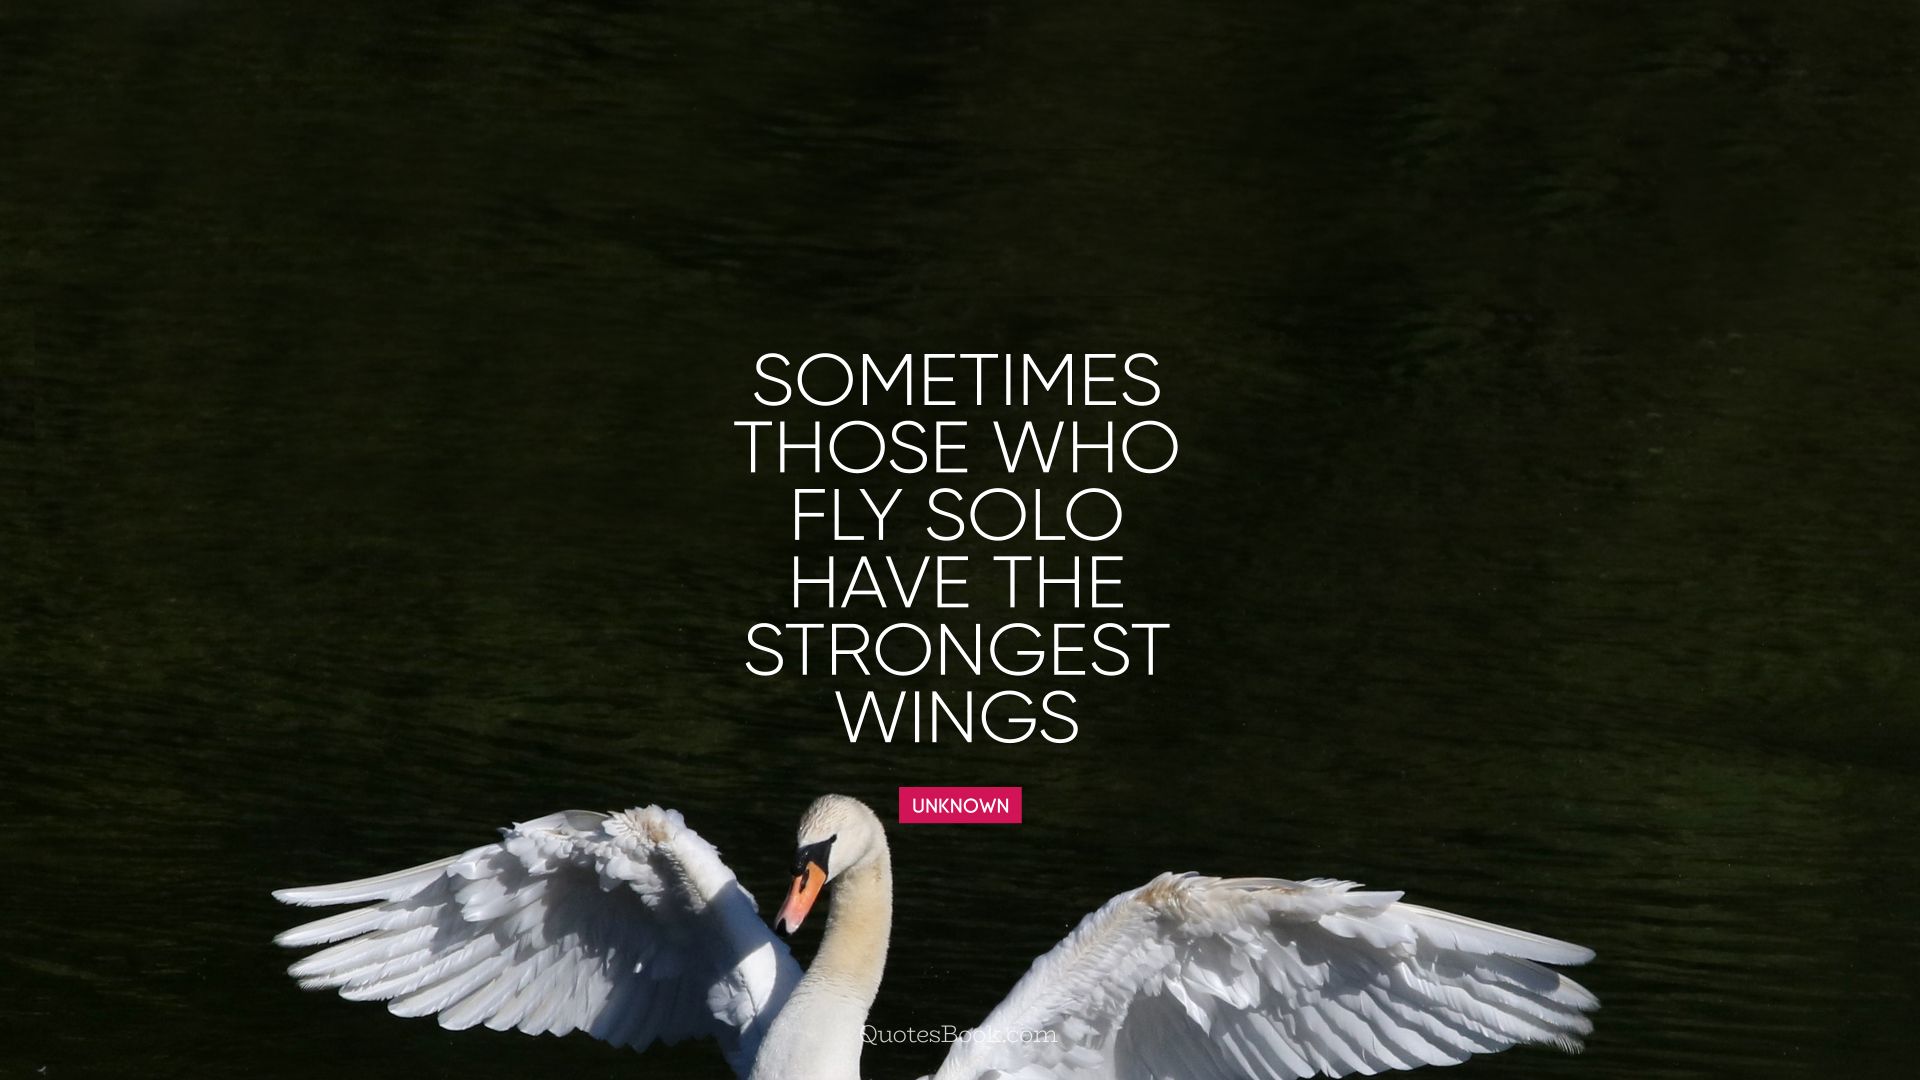 Sometimes those who fly solo have the strongest wings